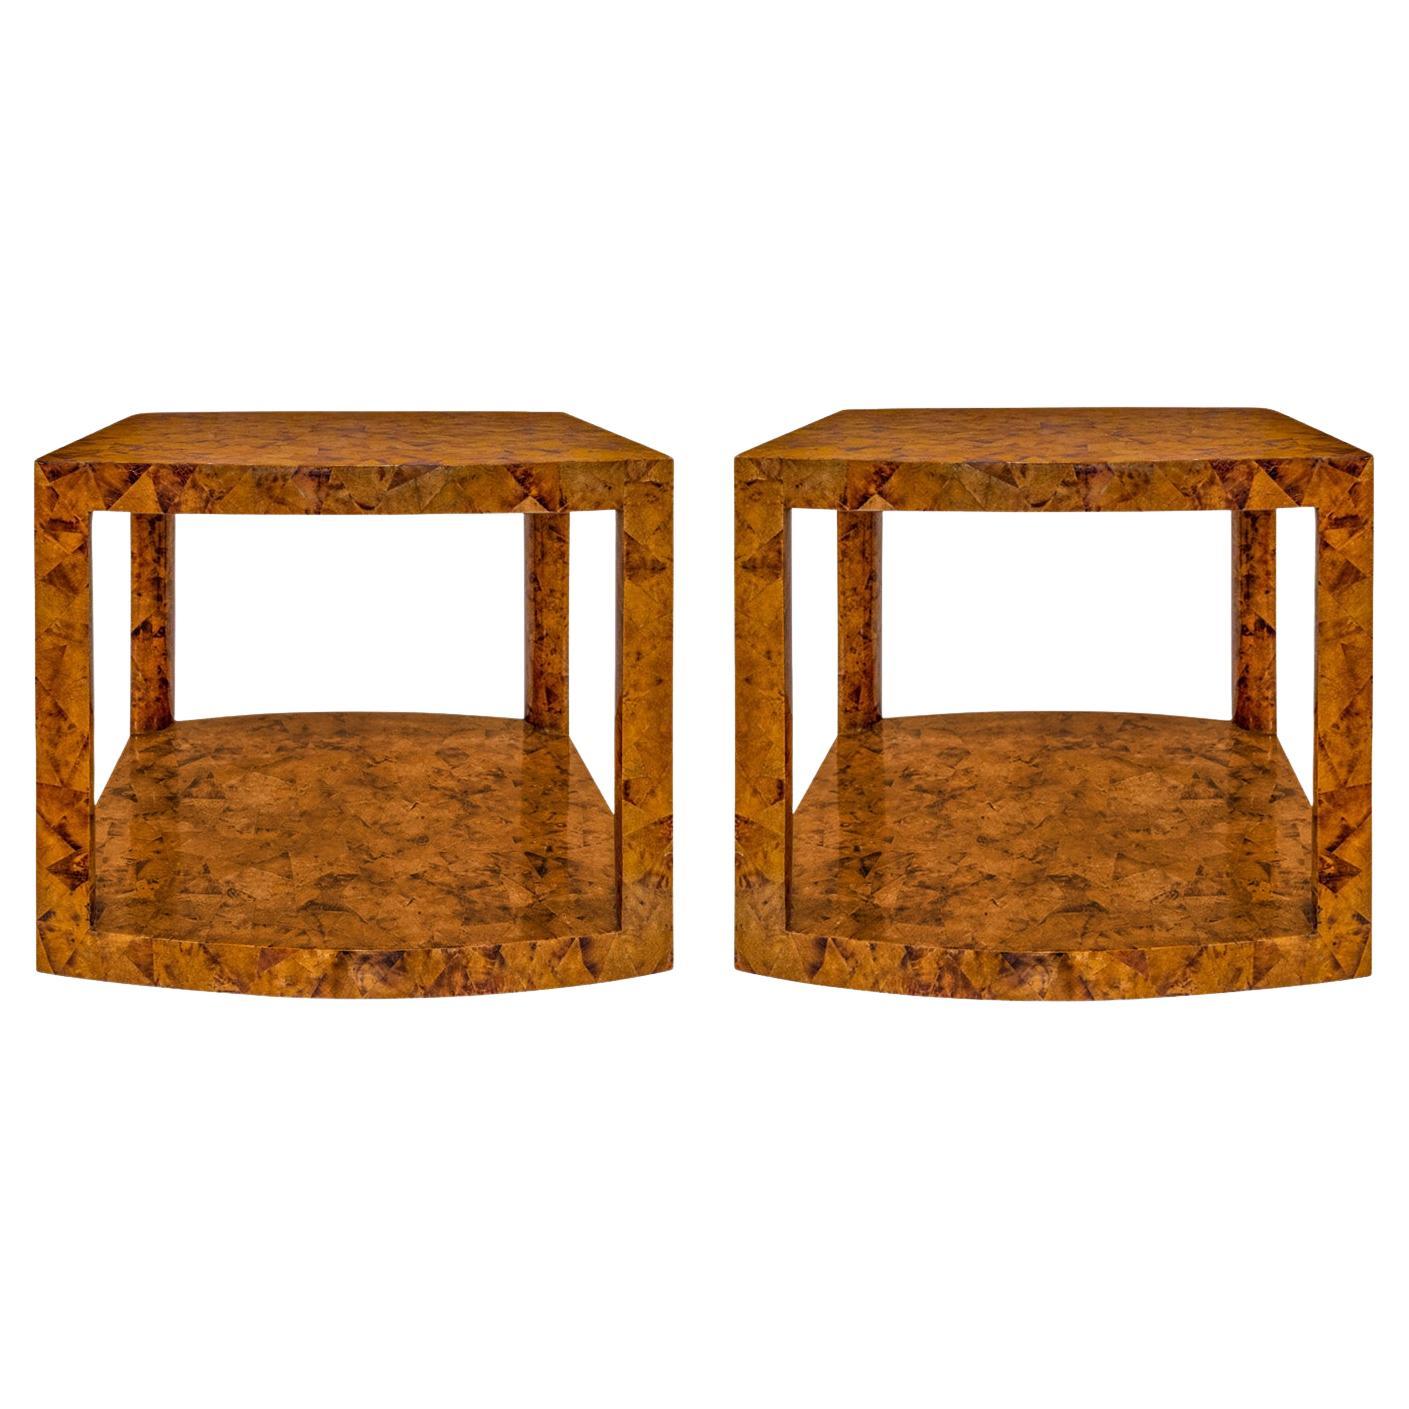 Karl Springer Pair of Large Tessellated Penshell End Tables 1980s (Signed) For Sale